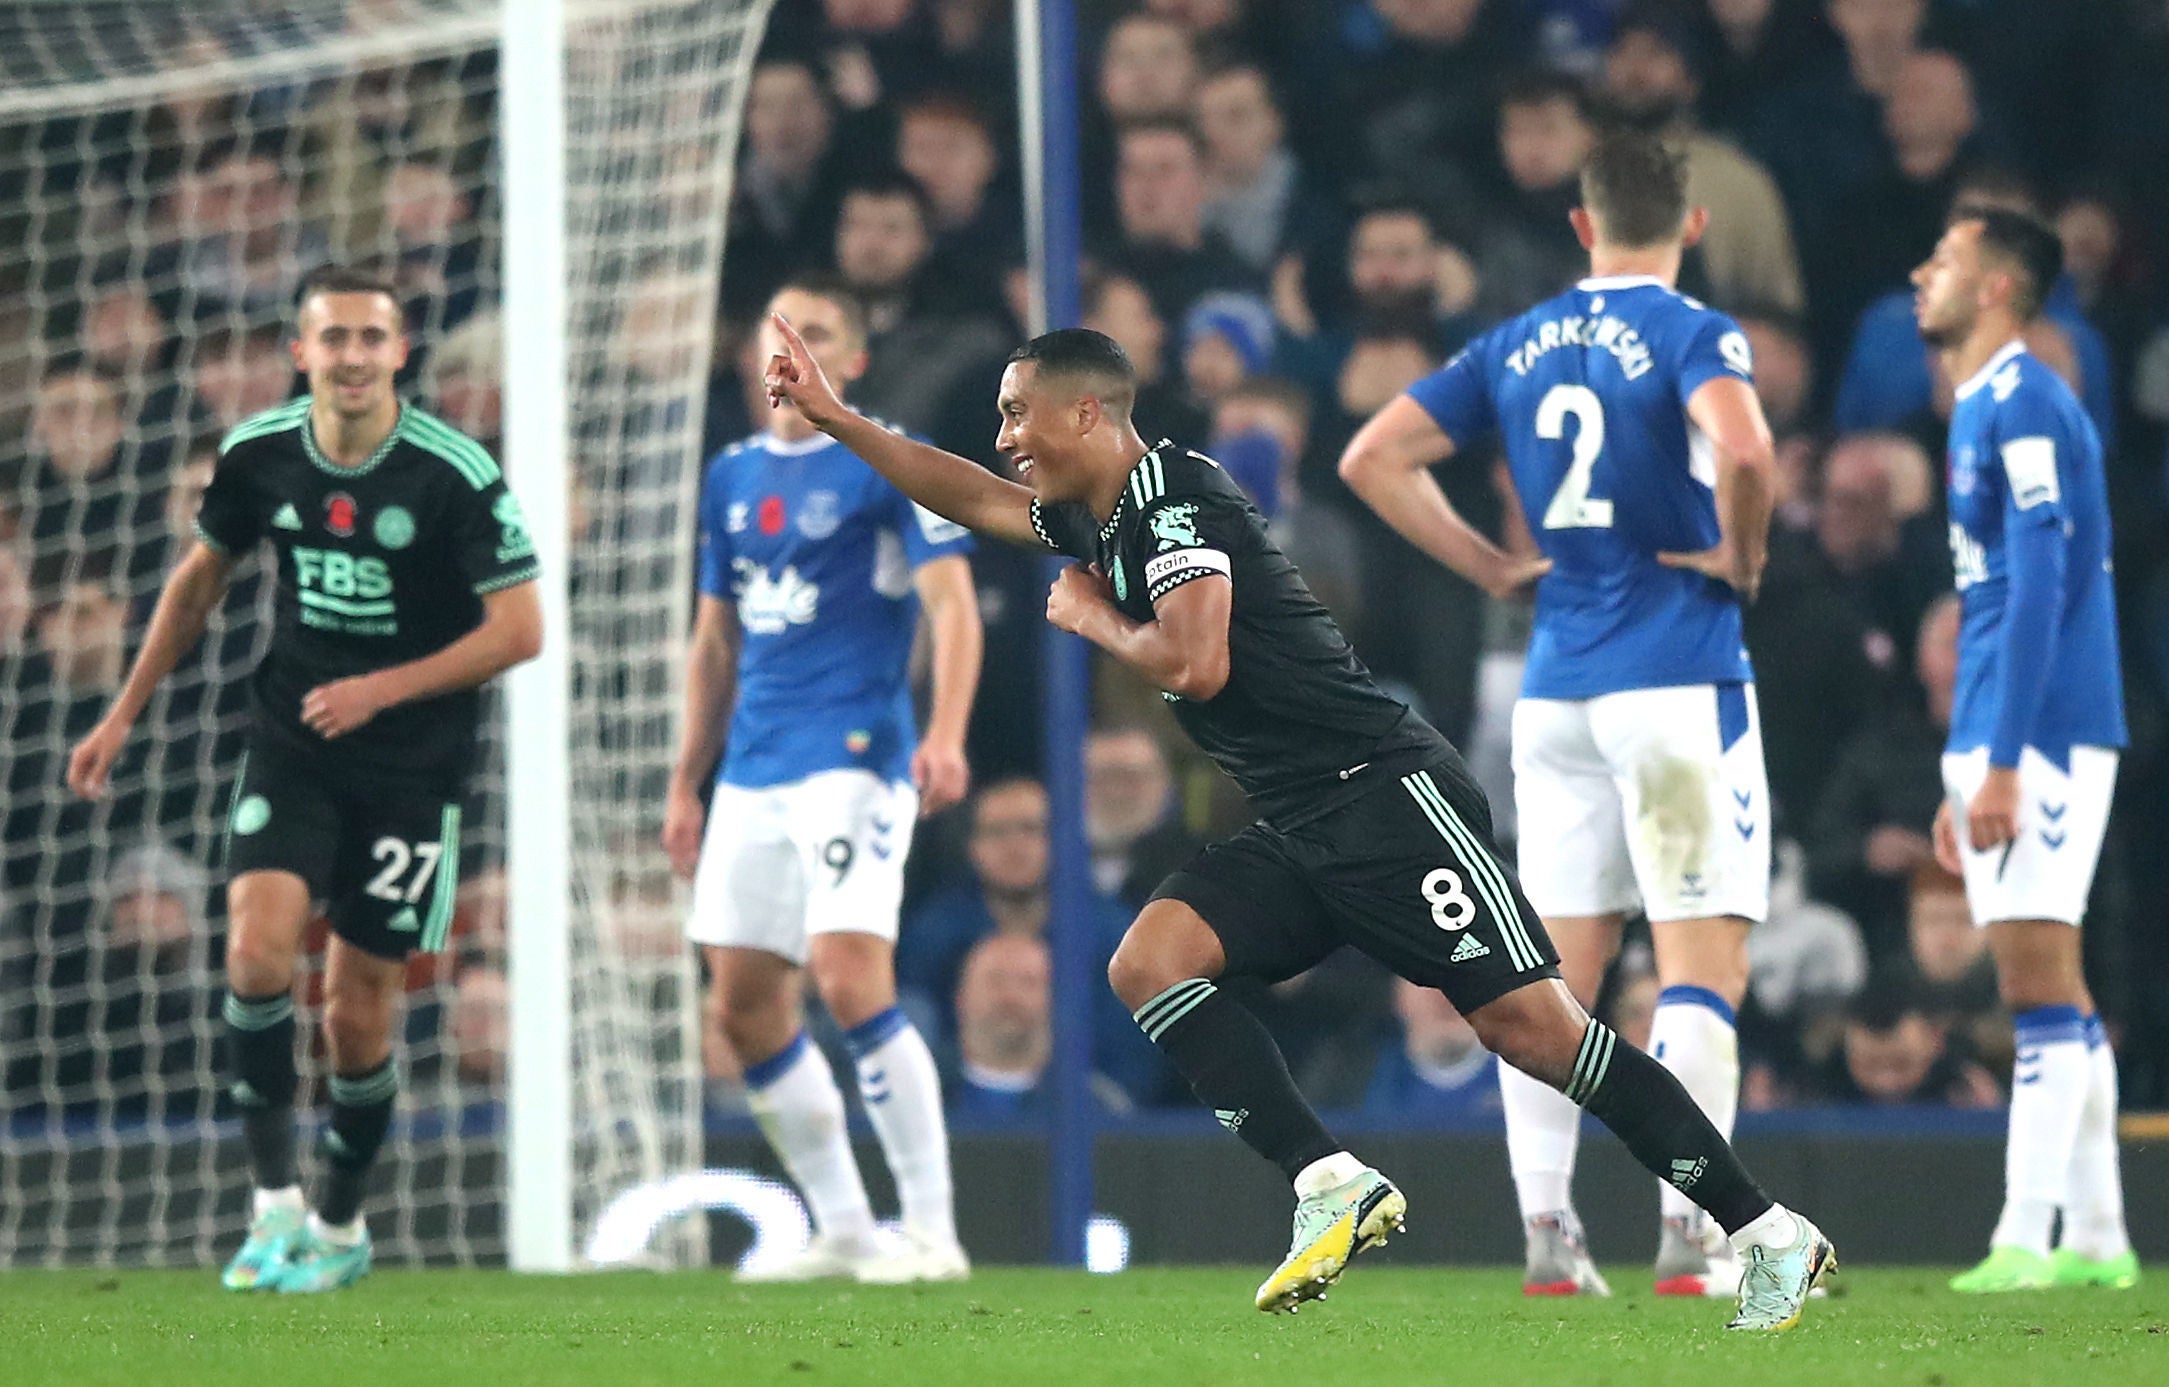 Youri Tielemans’ goal handed Everton another defeat